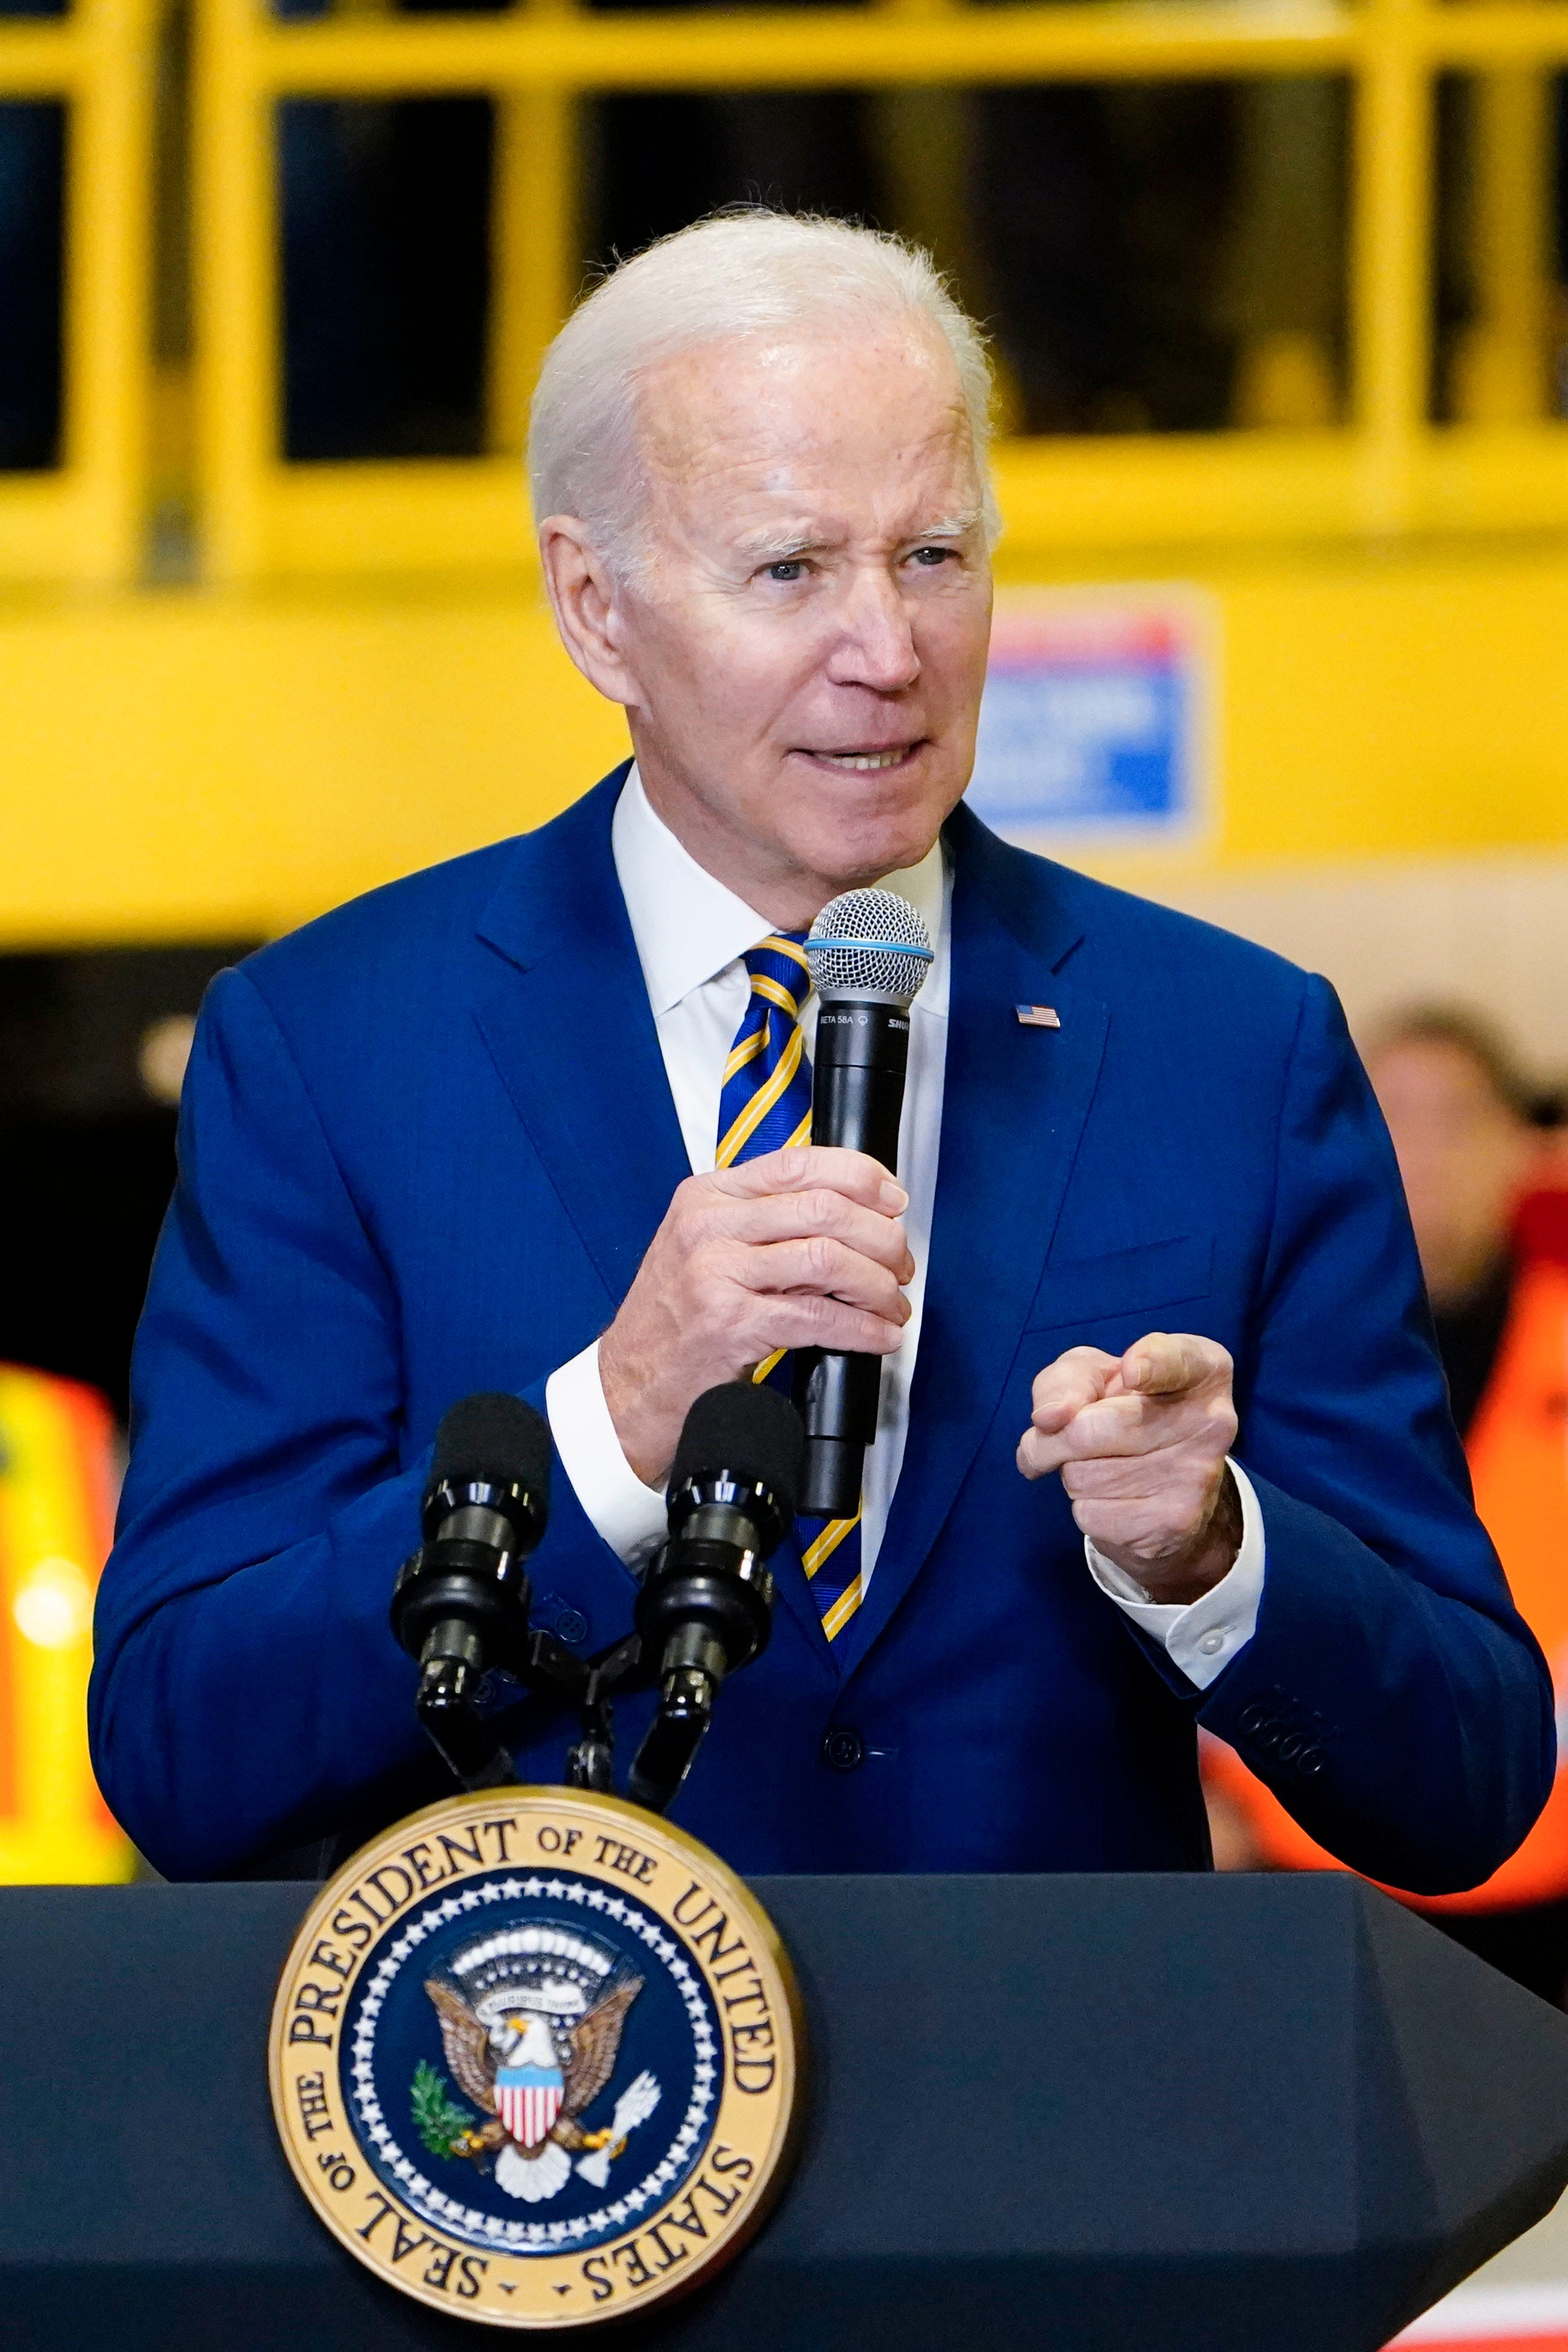 biden should end his quest for a second term. this is why